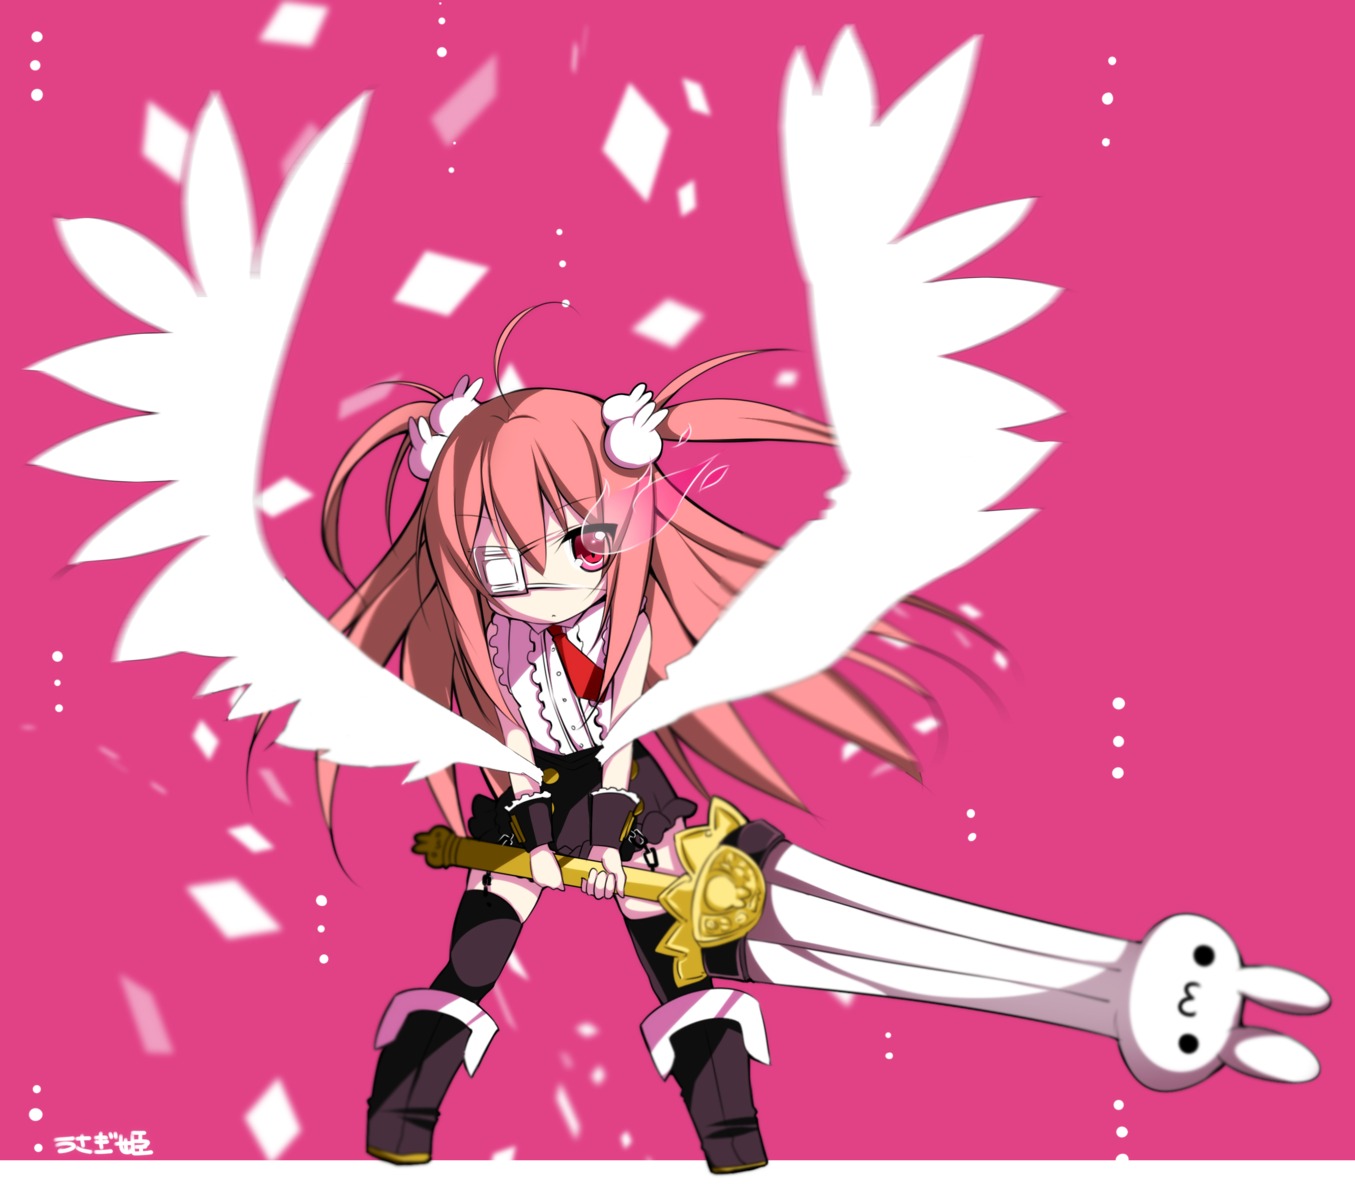 eyepatch thighhighs usagihime wings